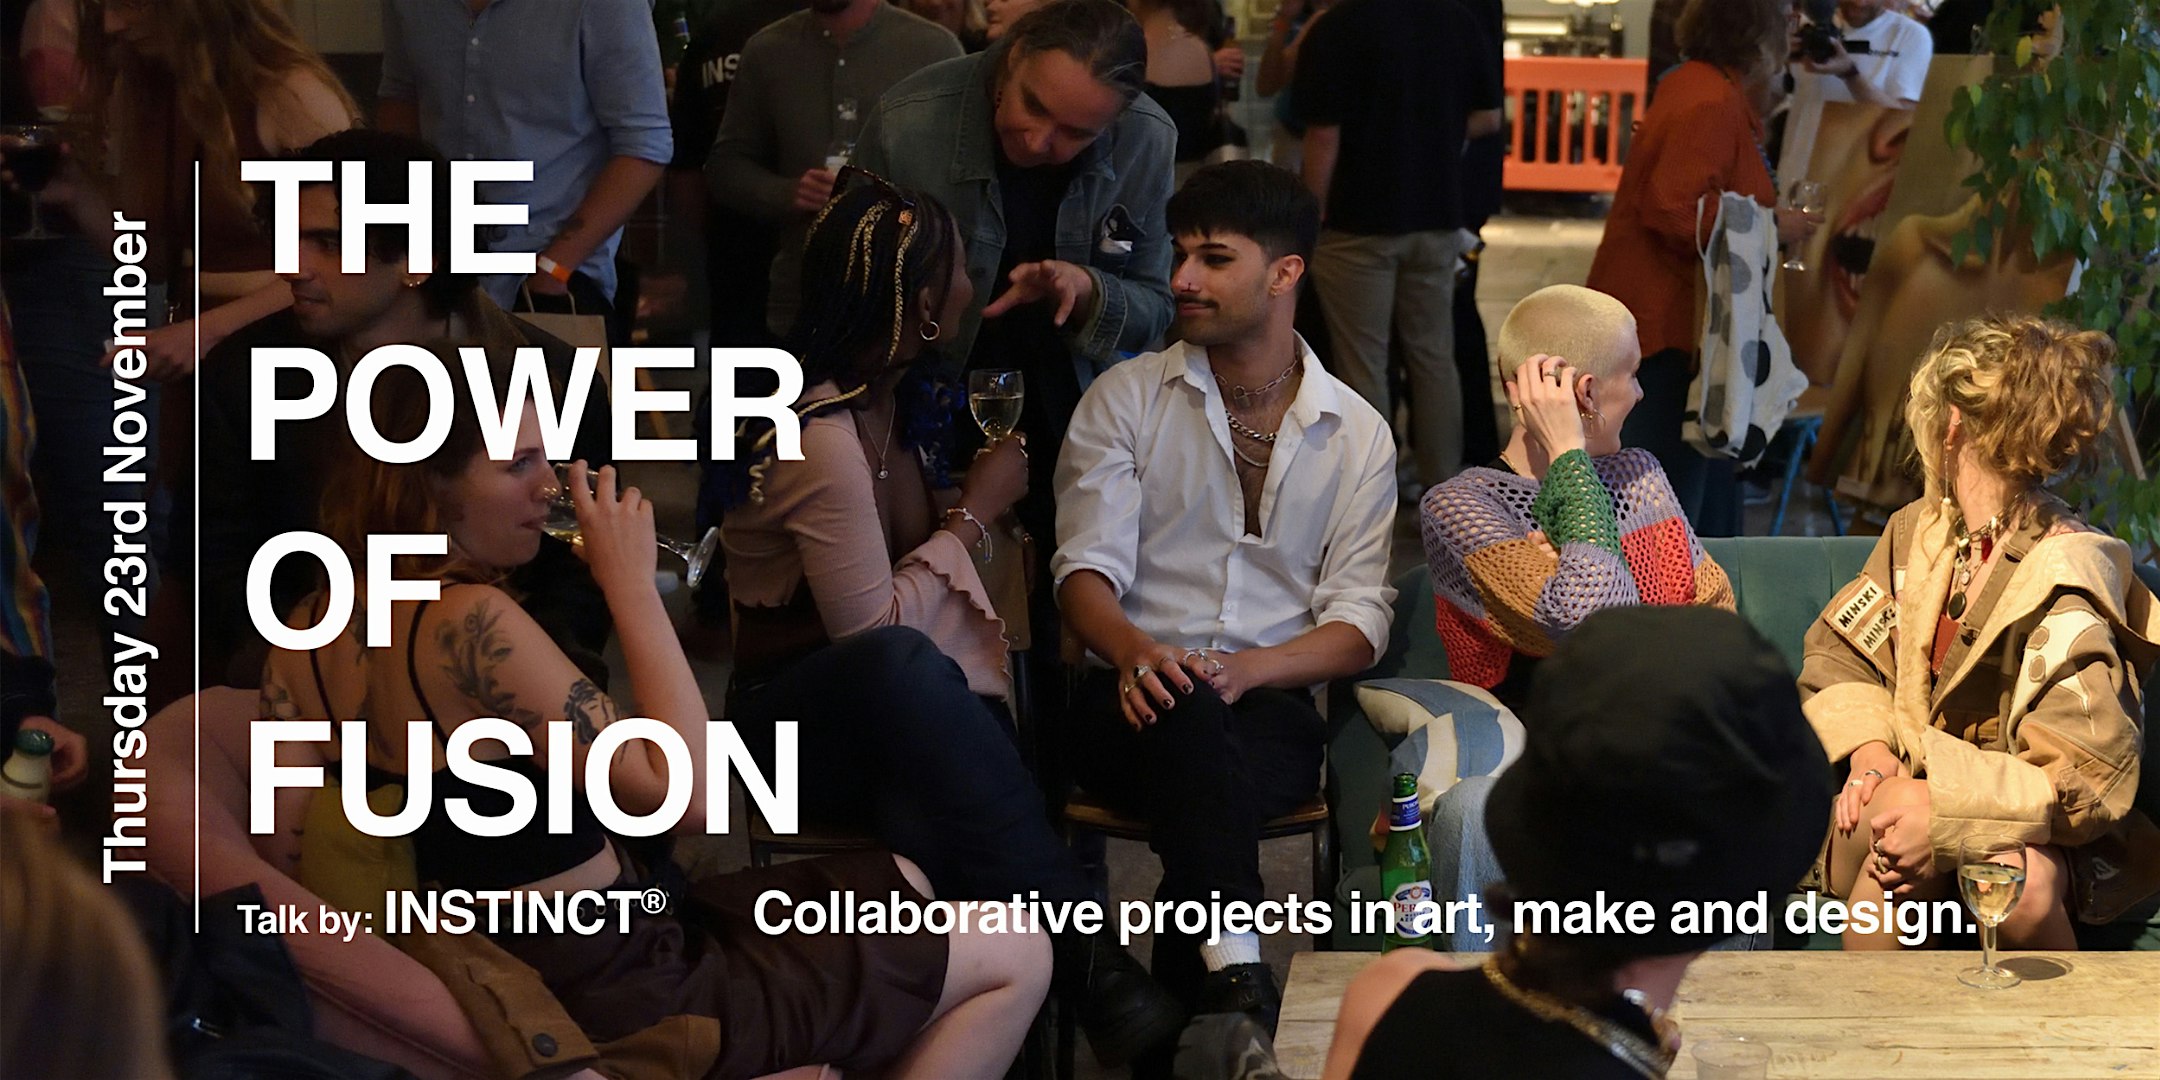 THE POWER OF FUSION: COLLABORATIVE PROJECTS IN ART, MAKE & DESIGN